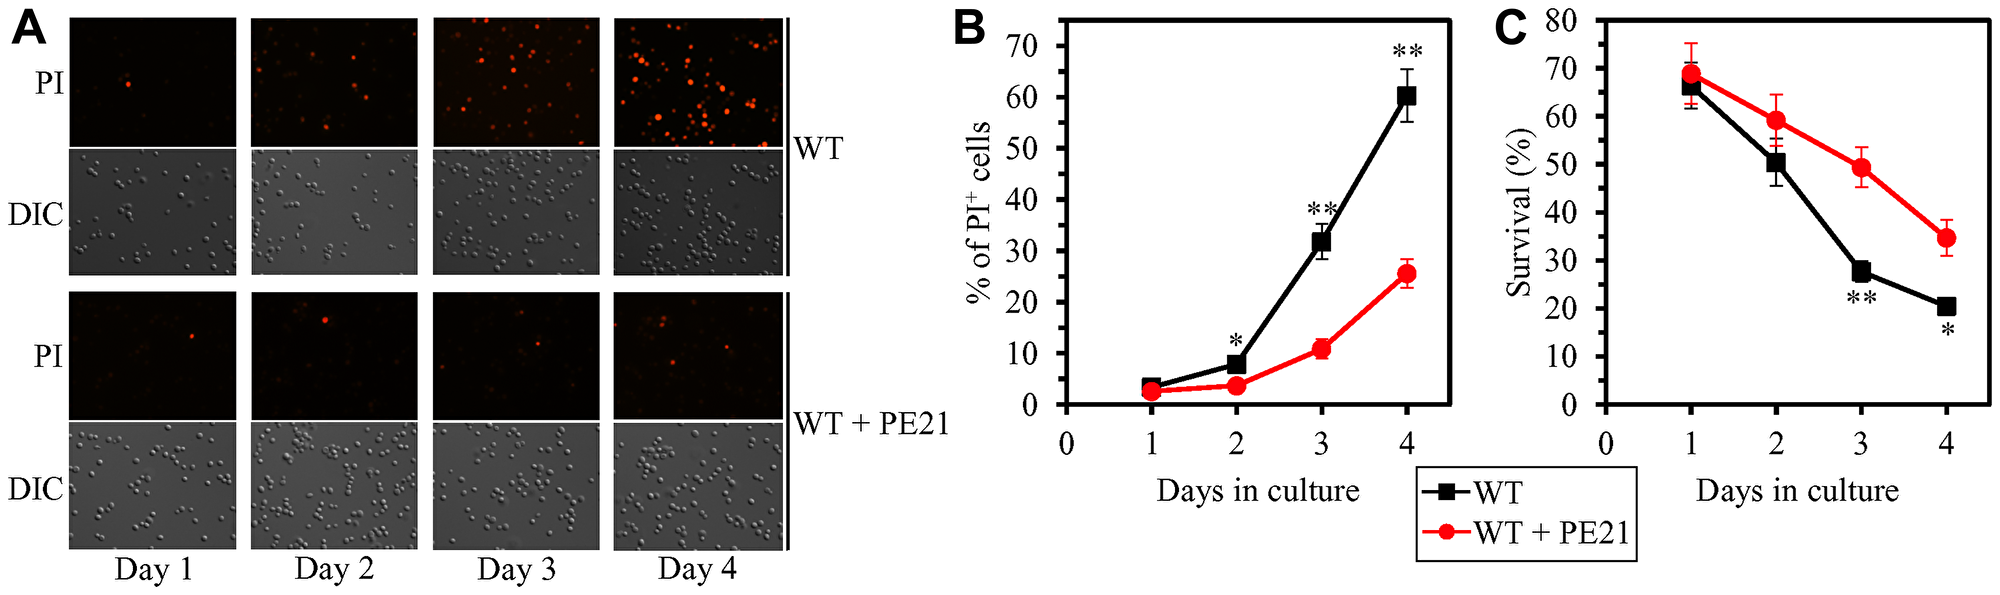 PE21 delays an age-related onset of necrotic death in yeast cells, decelerates the progression of the necrotic cell death process, and makes yeast less susceptible to a liponecrotic mode of regulated cell death (RCD).